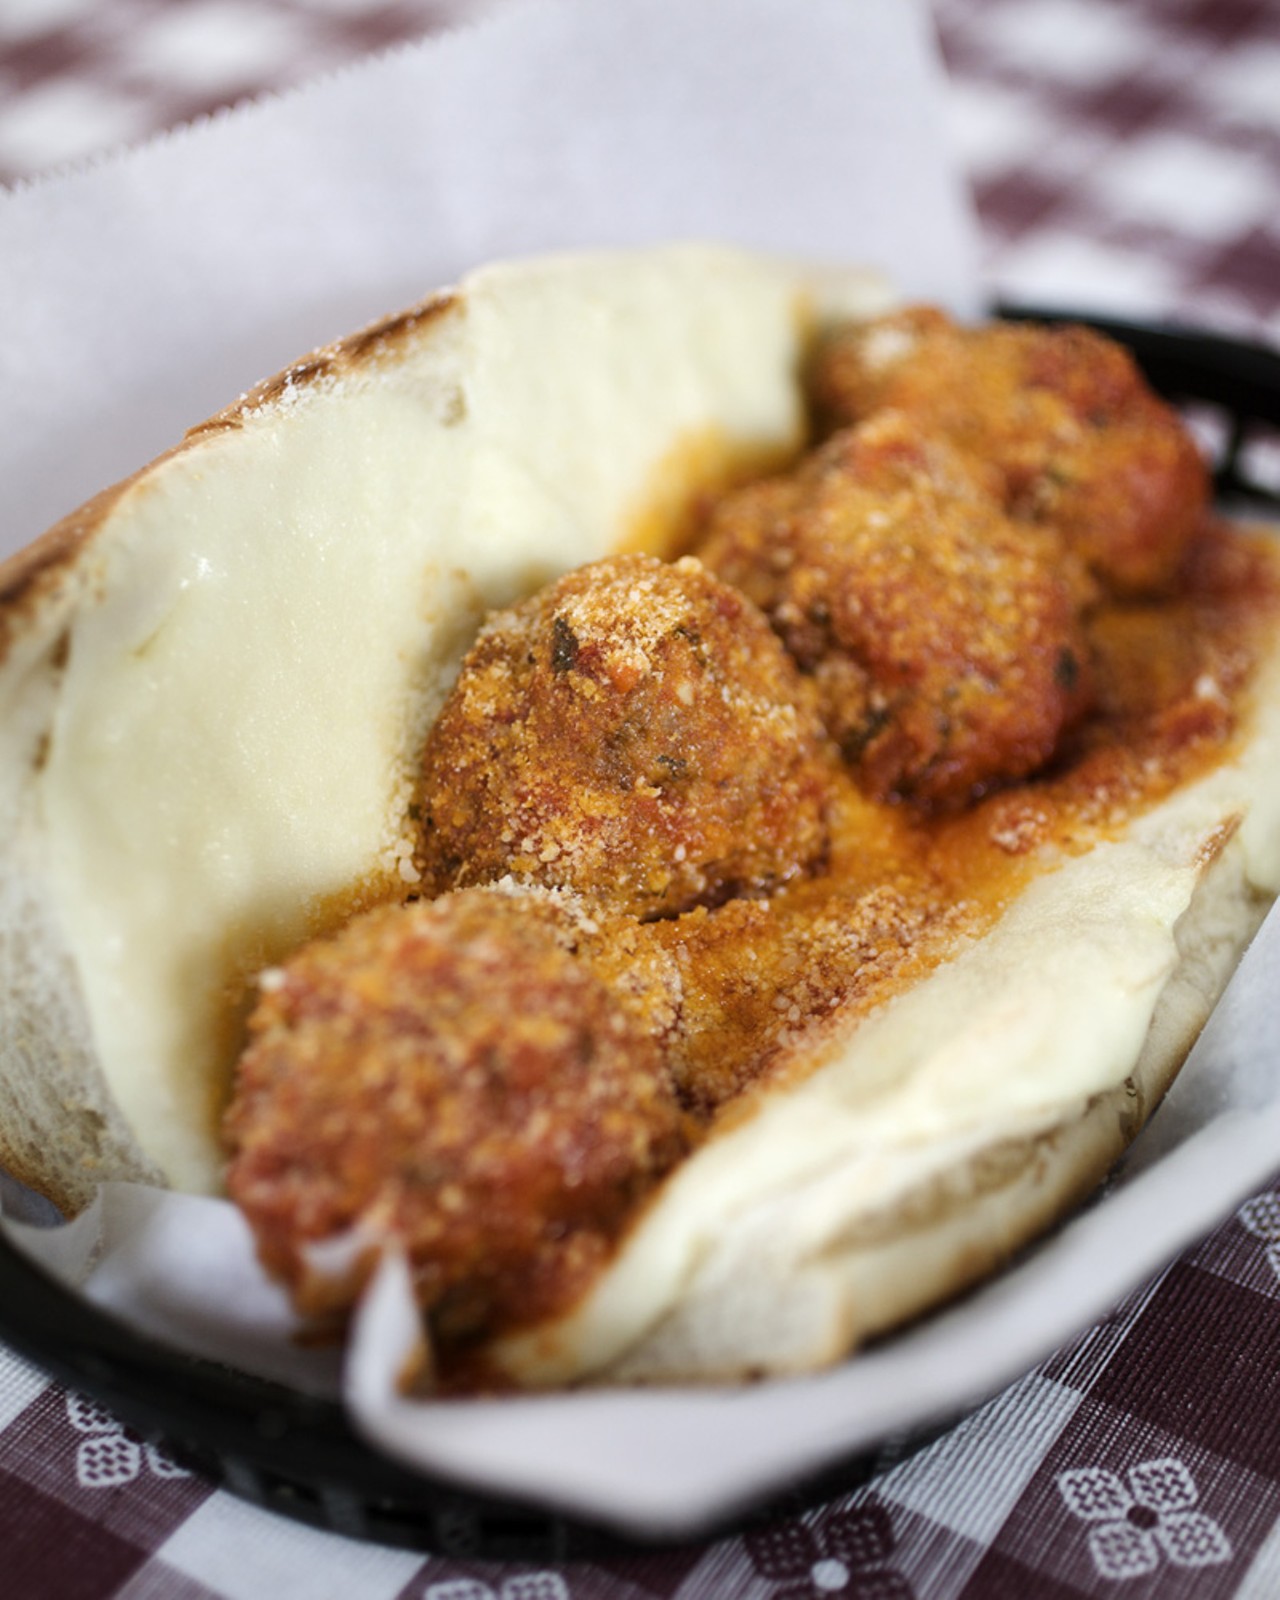 The Meatball Sub is prepared with housemade meatballs, simmered in marinara sauce, topped with provolone and parmigiano cheeses.